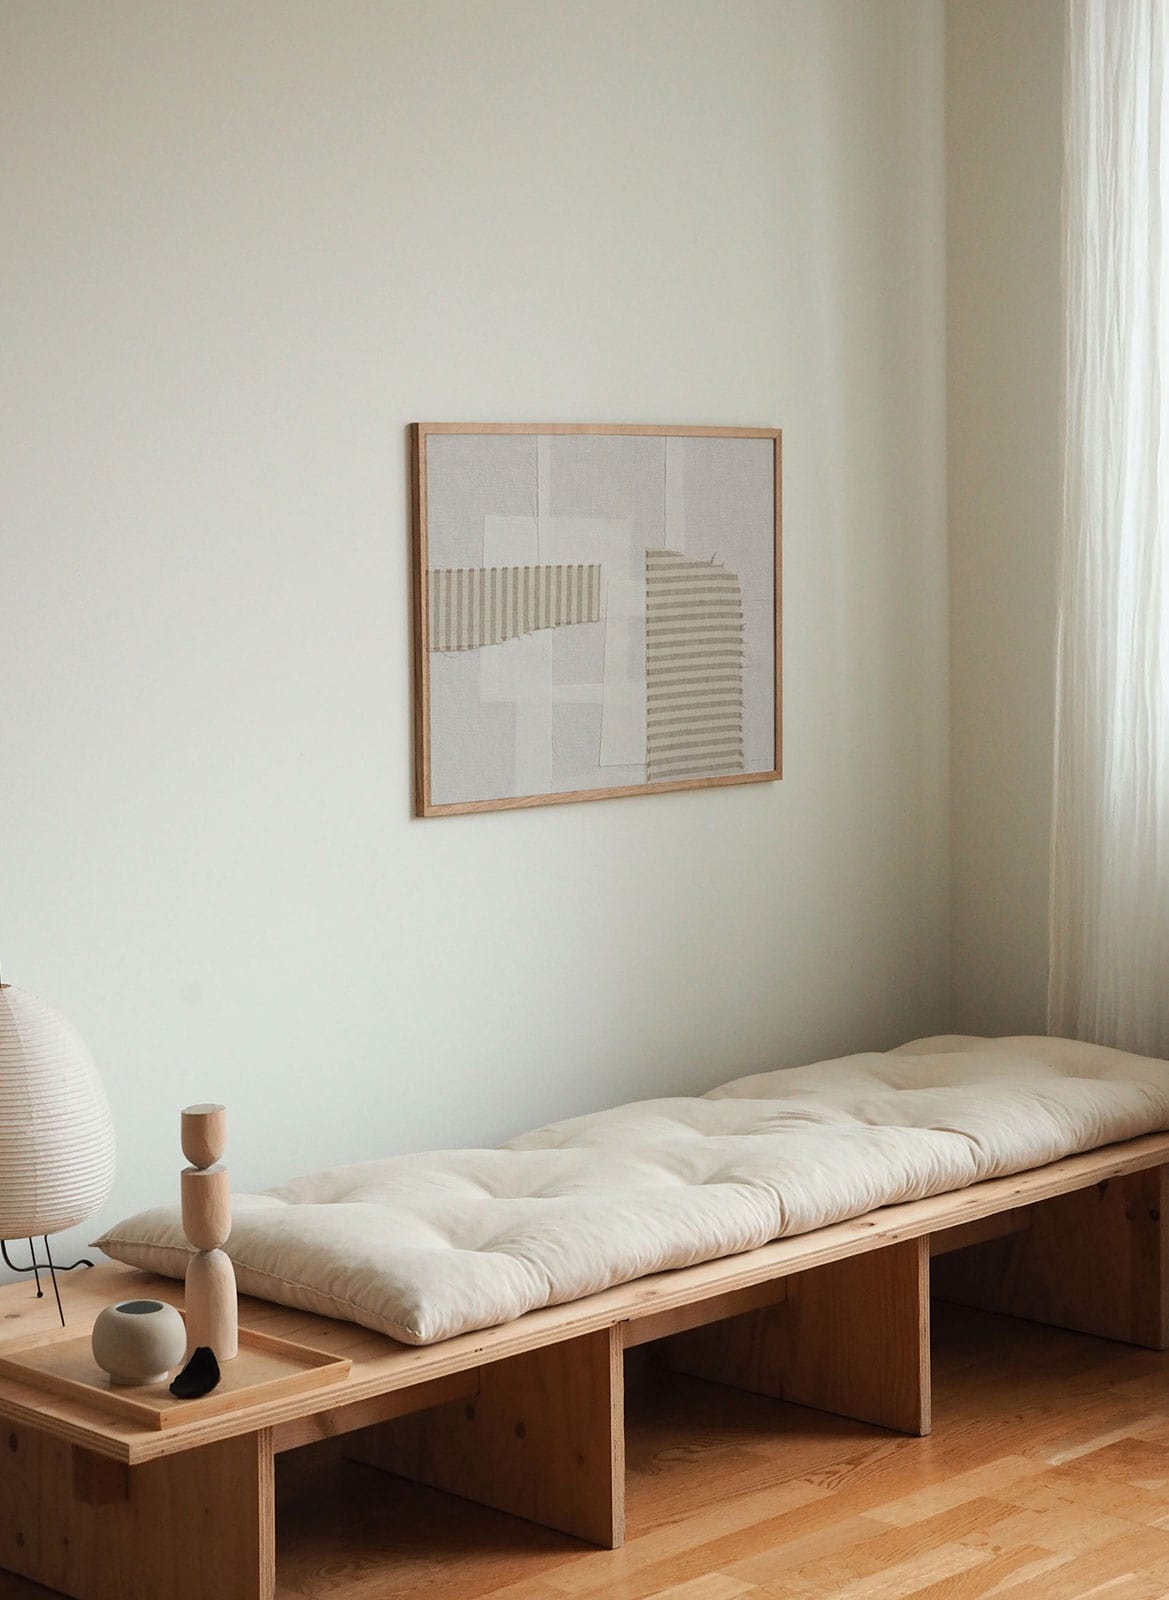 Framed black and white poster hanging above daybed by Atelier Cph